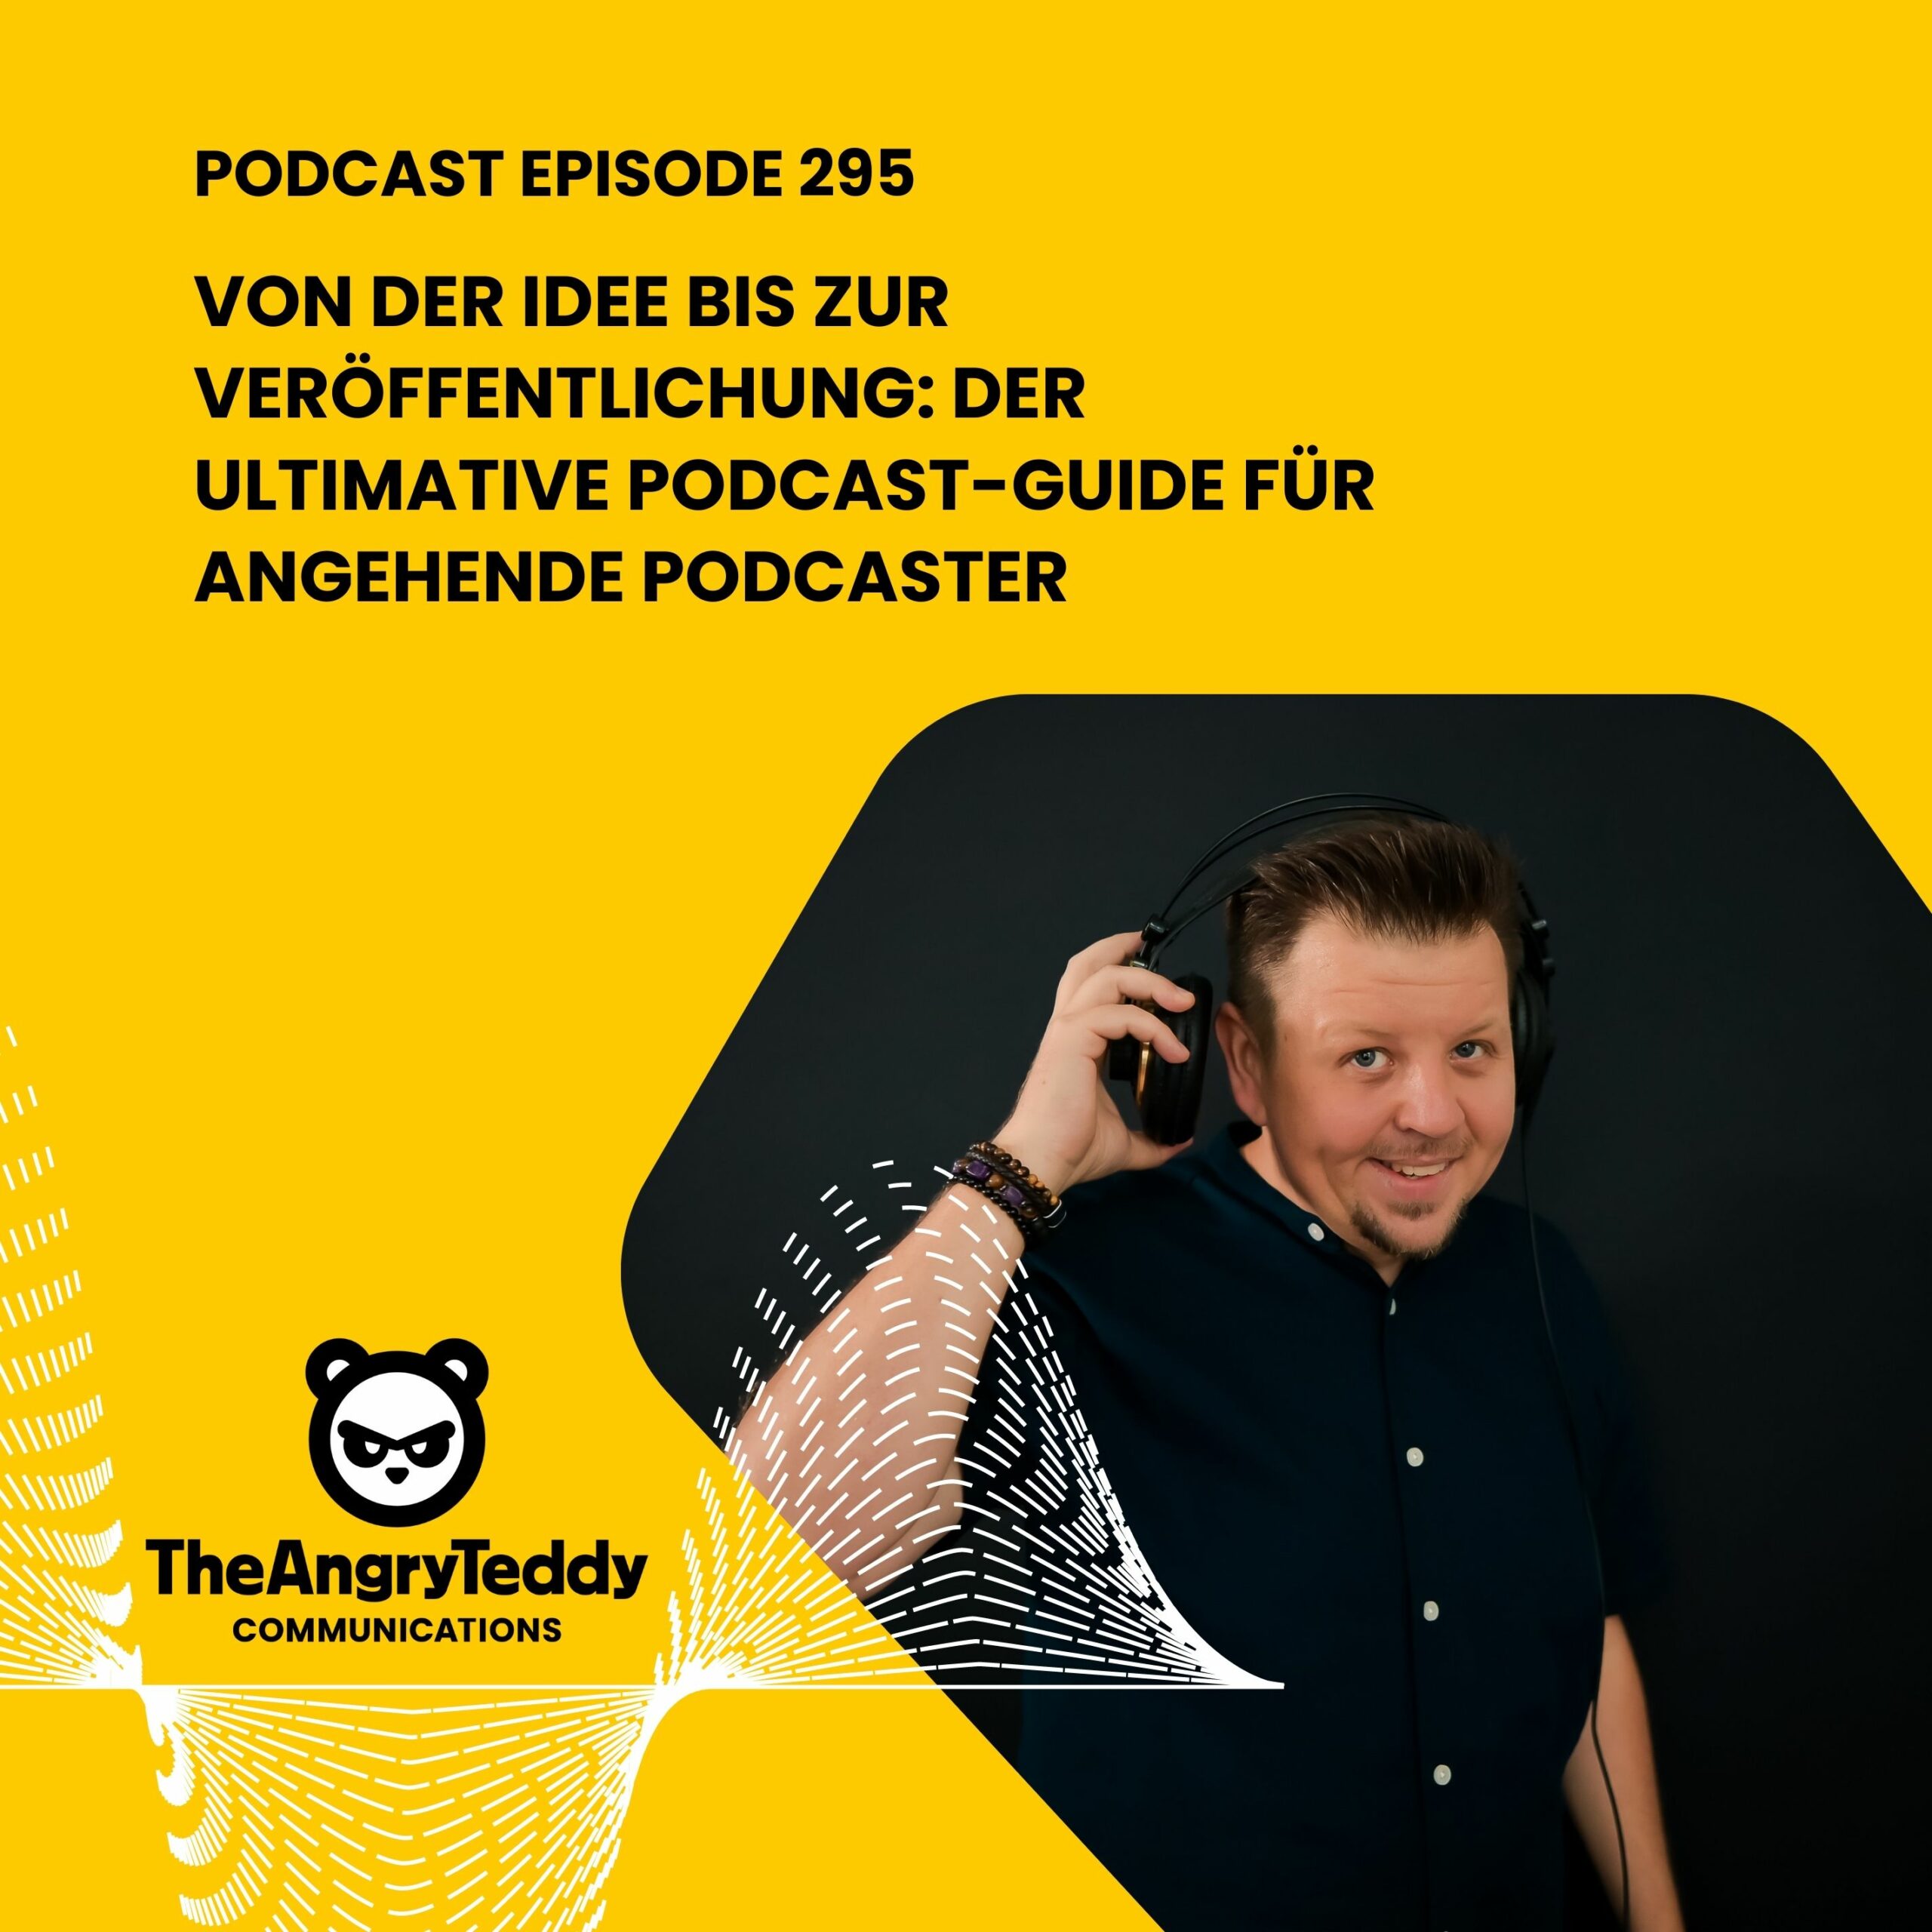 podcast-anleitung